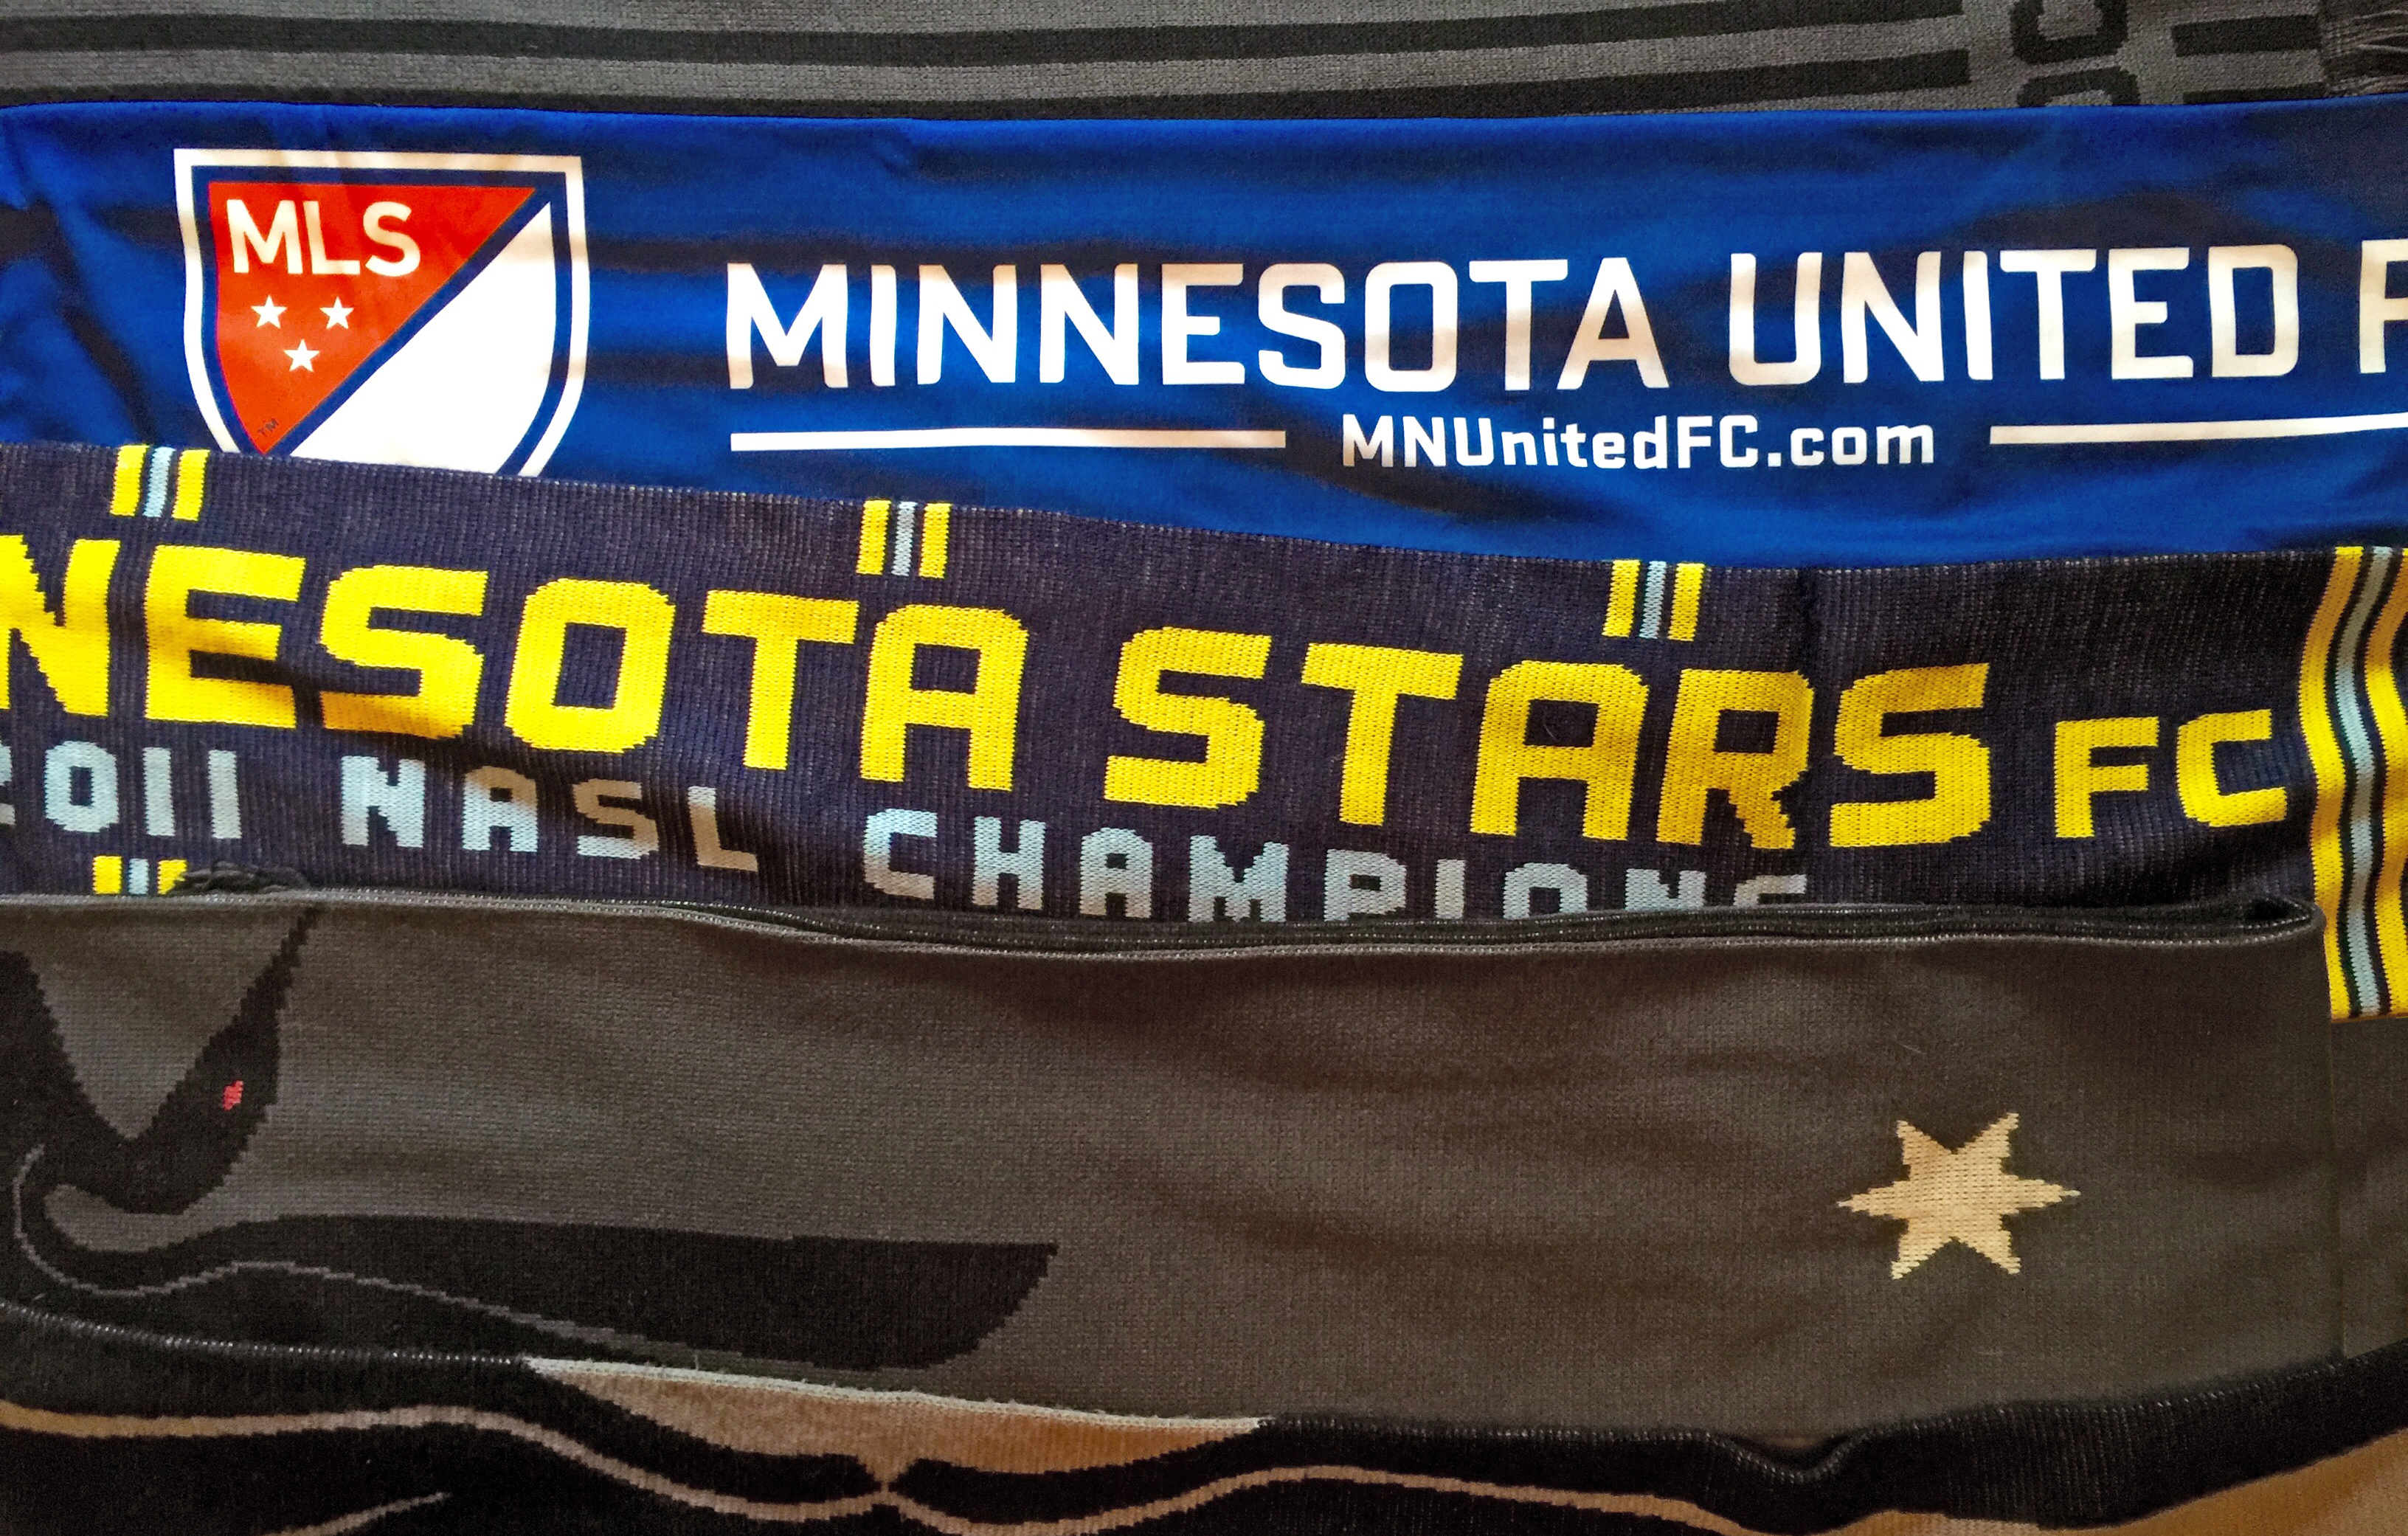 Minnesota Soccer Scarves and their History